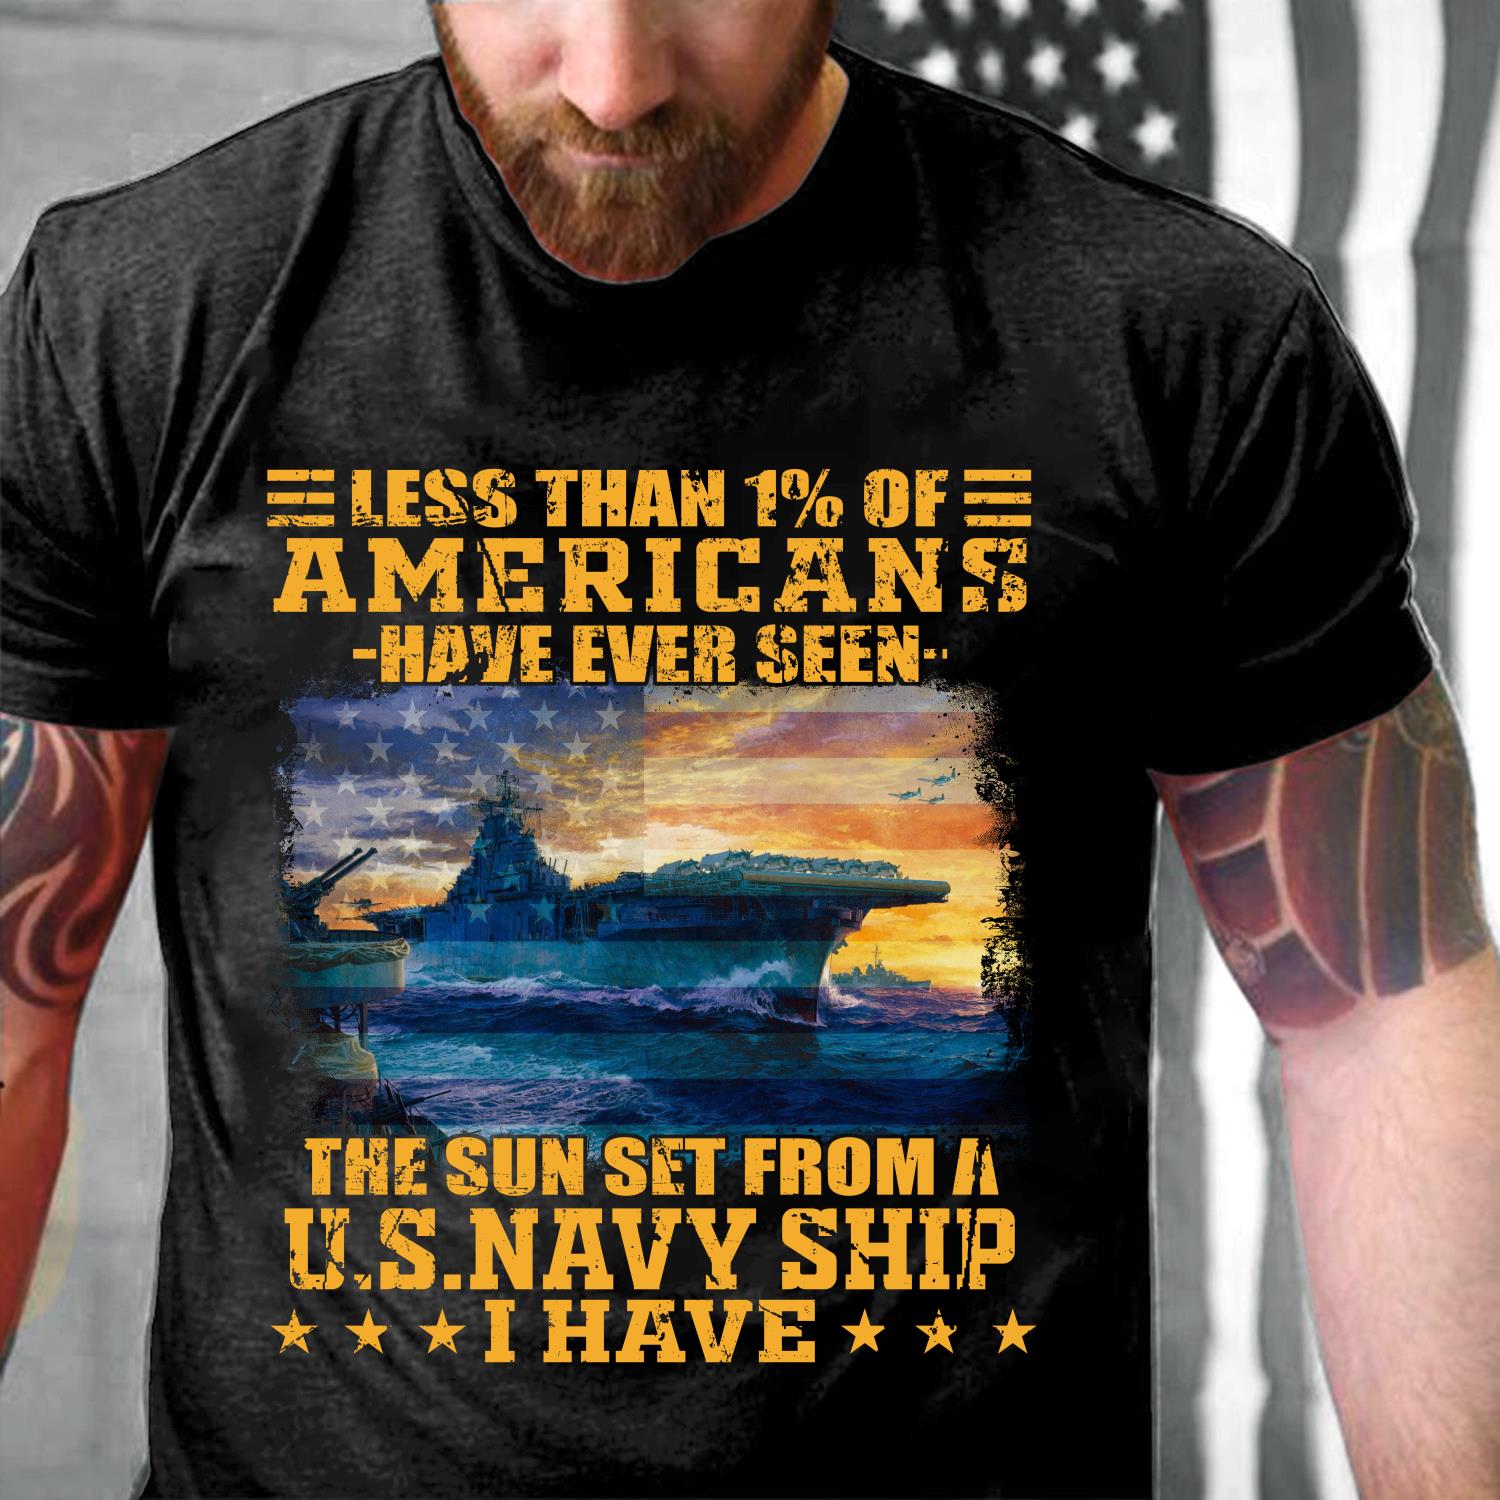 Less Than 1% Of Americans Have Ever Seen The Sunset From A U.S. Navy Ship T-Shirt